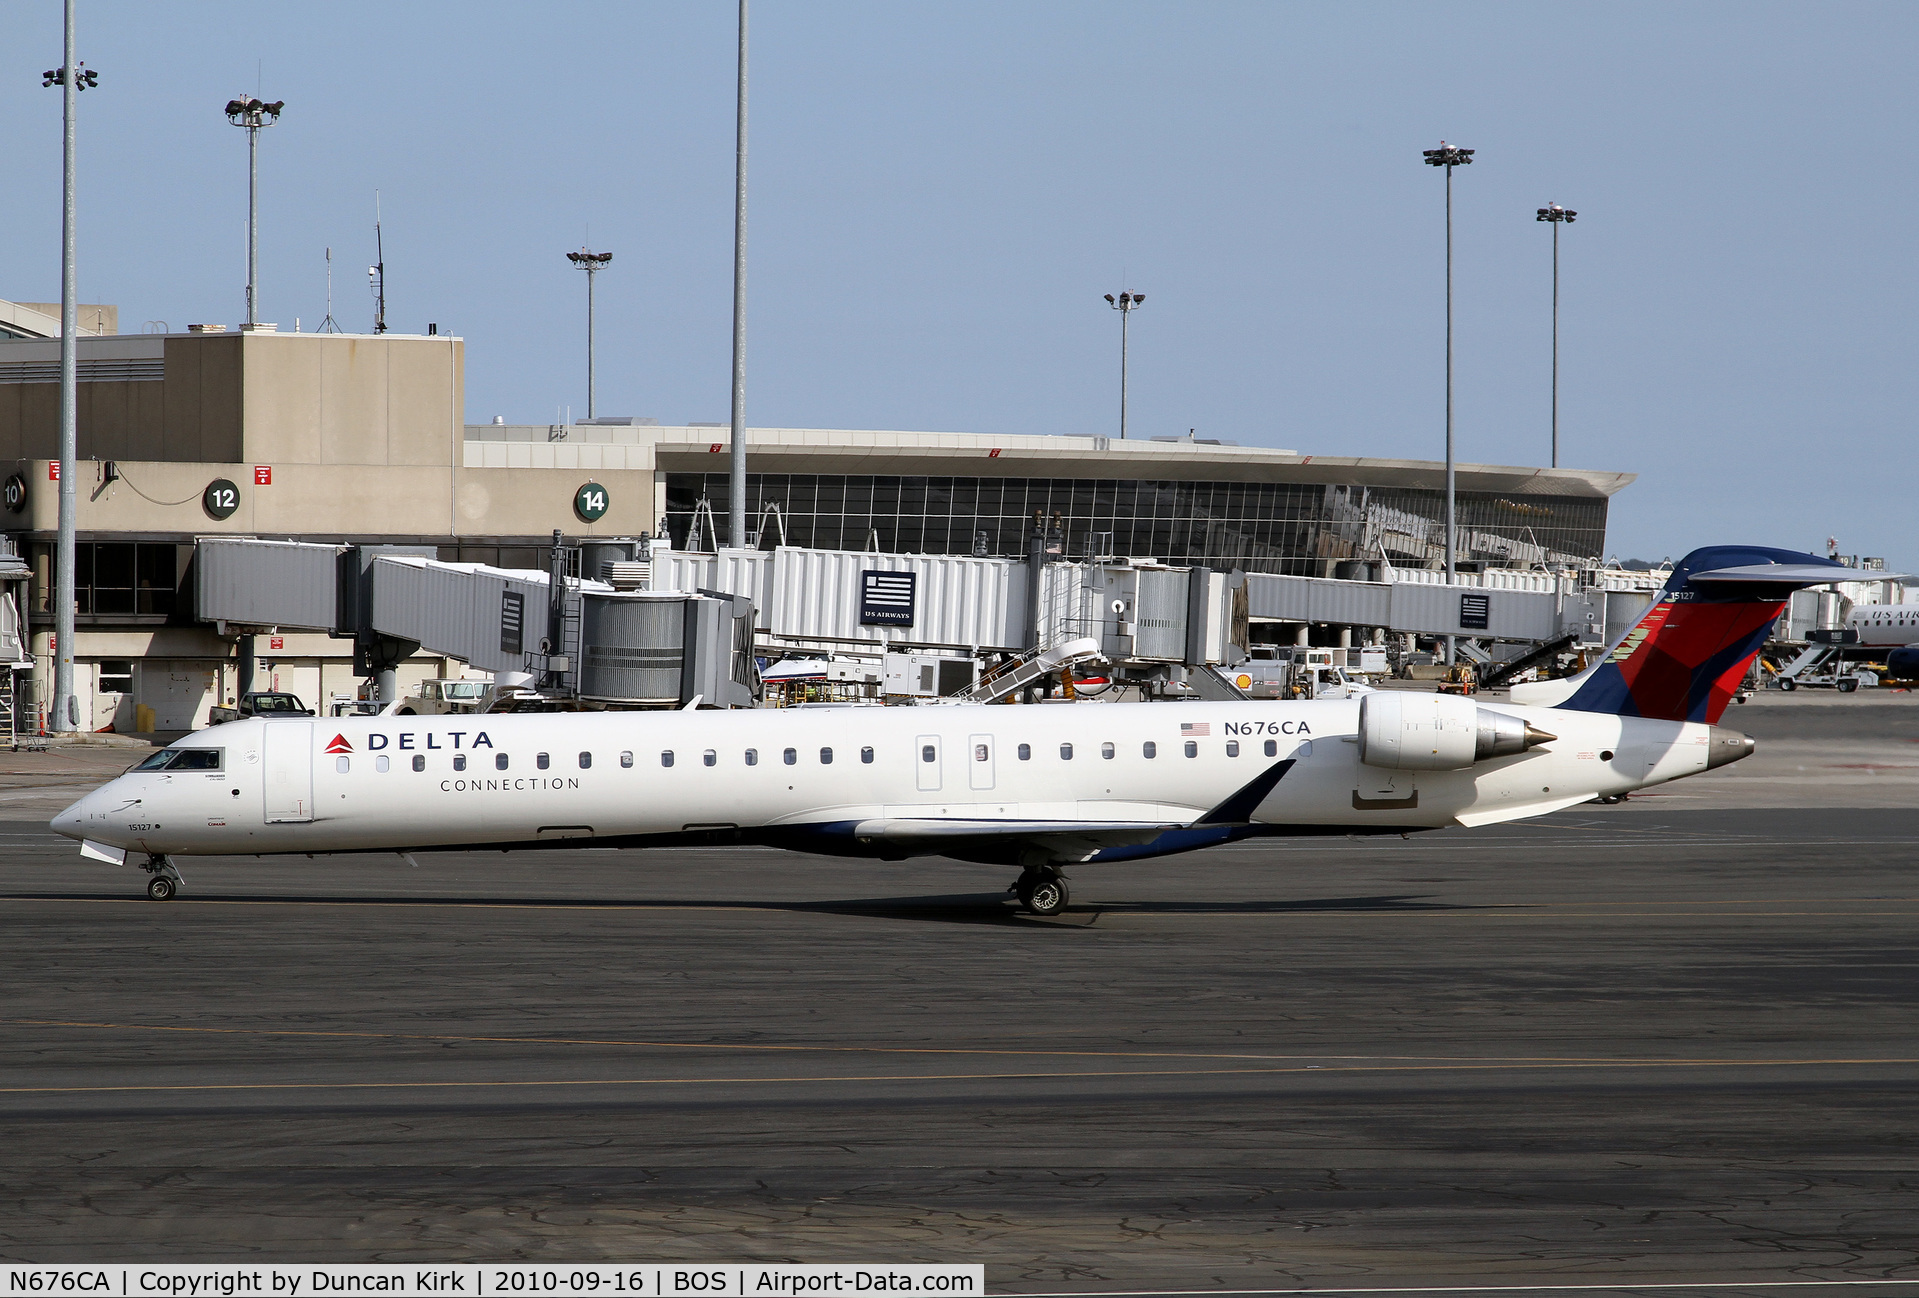 N676CA, 2007 Bombardier CRJ-900ER (CL-600-2D24) C/N 15127, Looks like a little paint is needed on the tail.